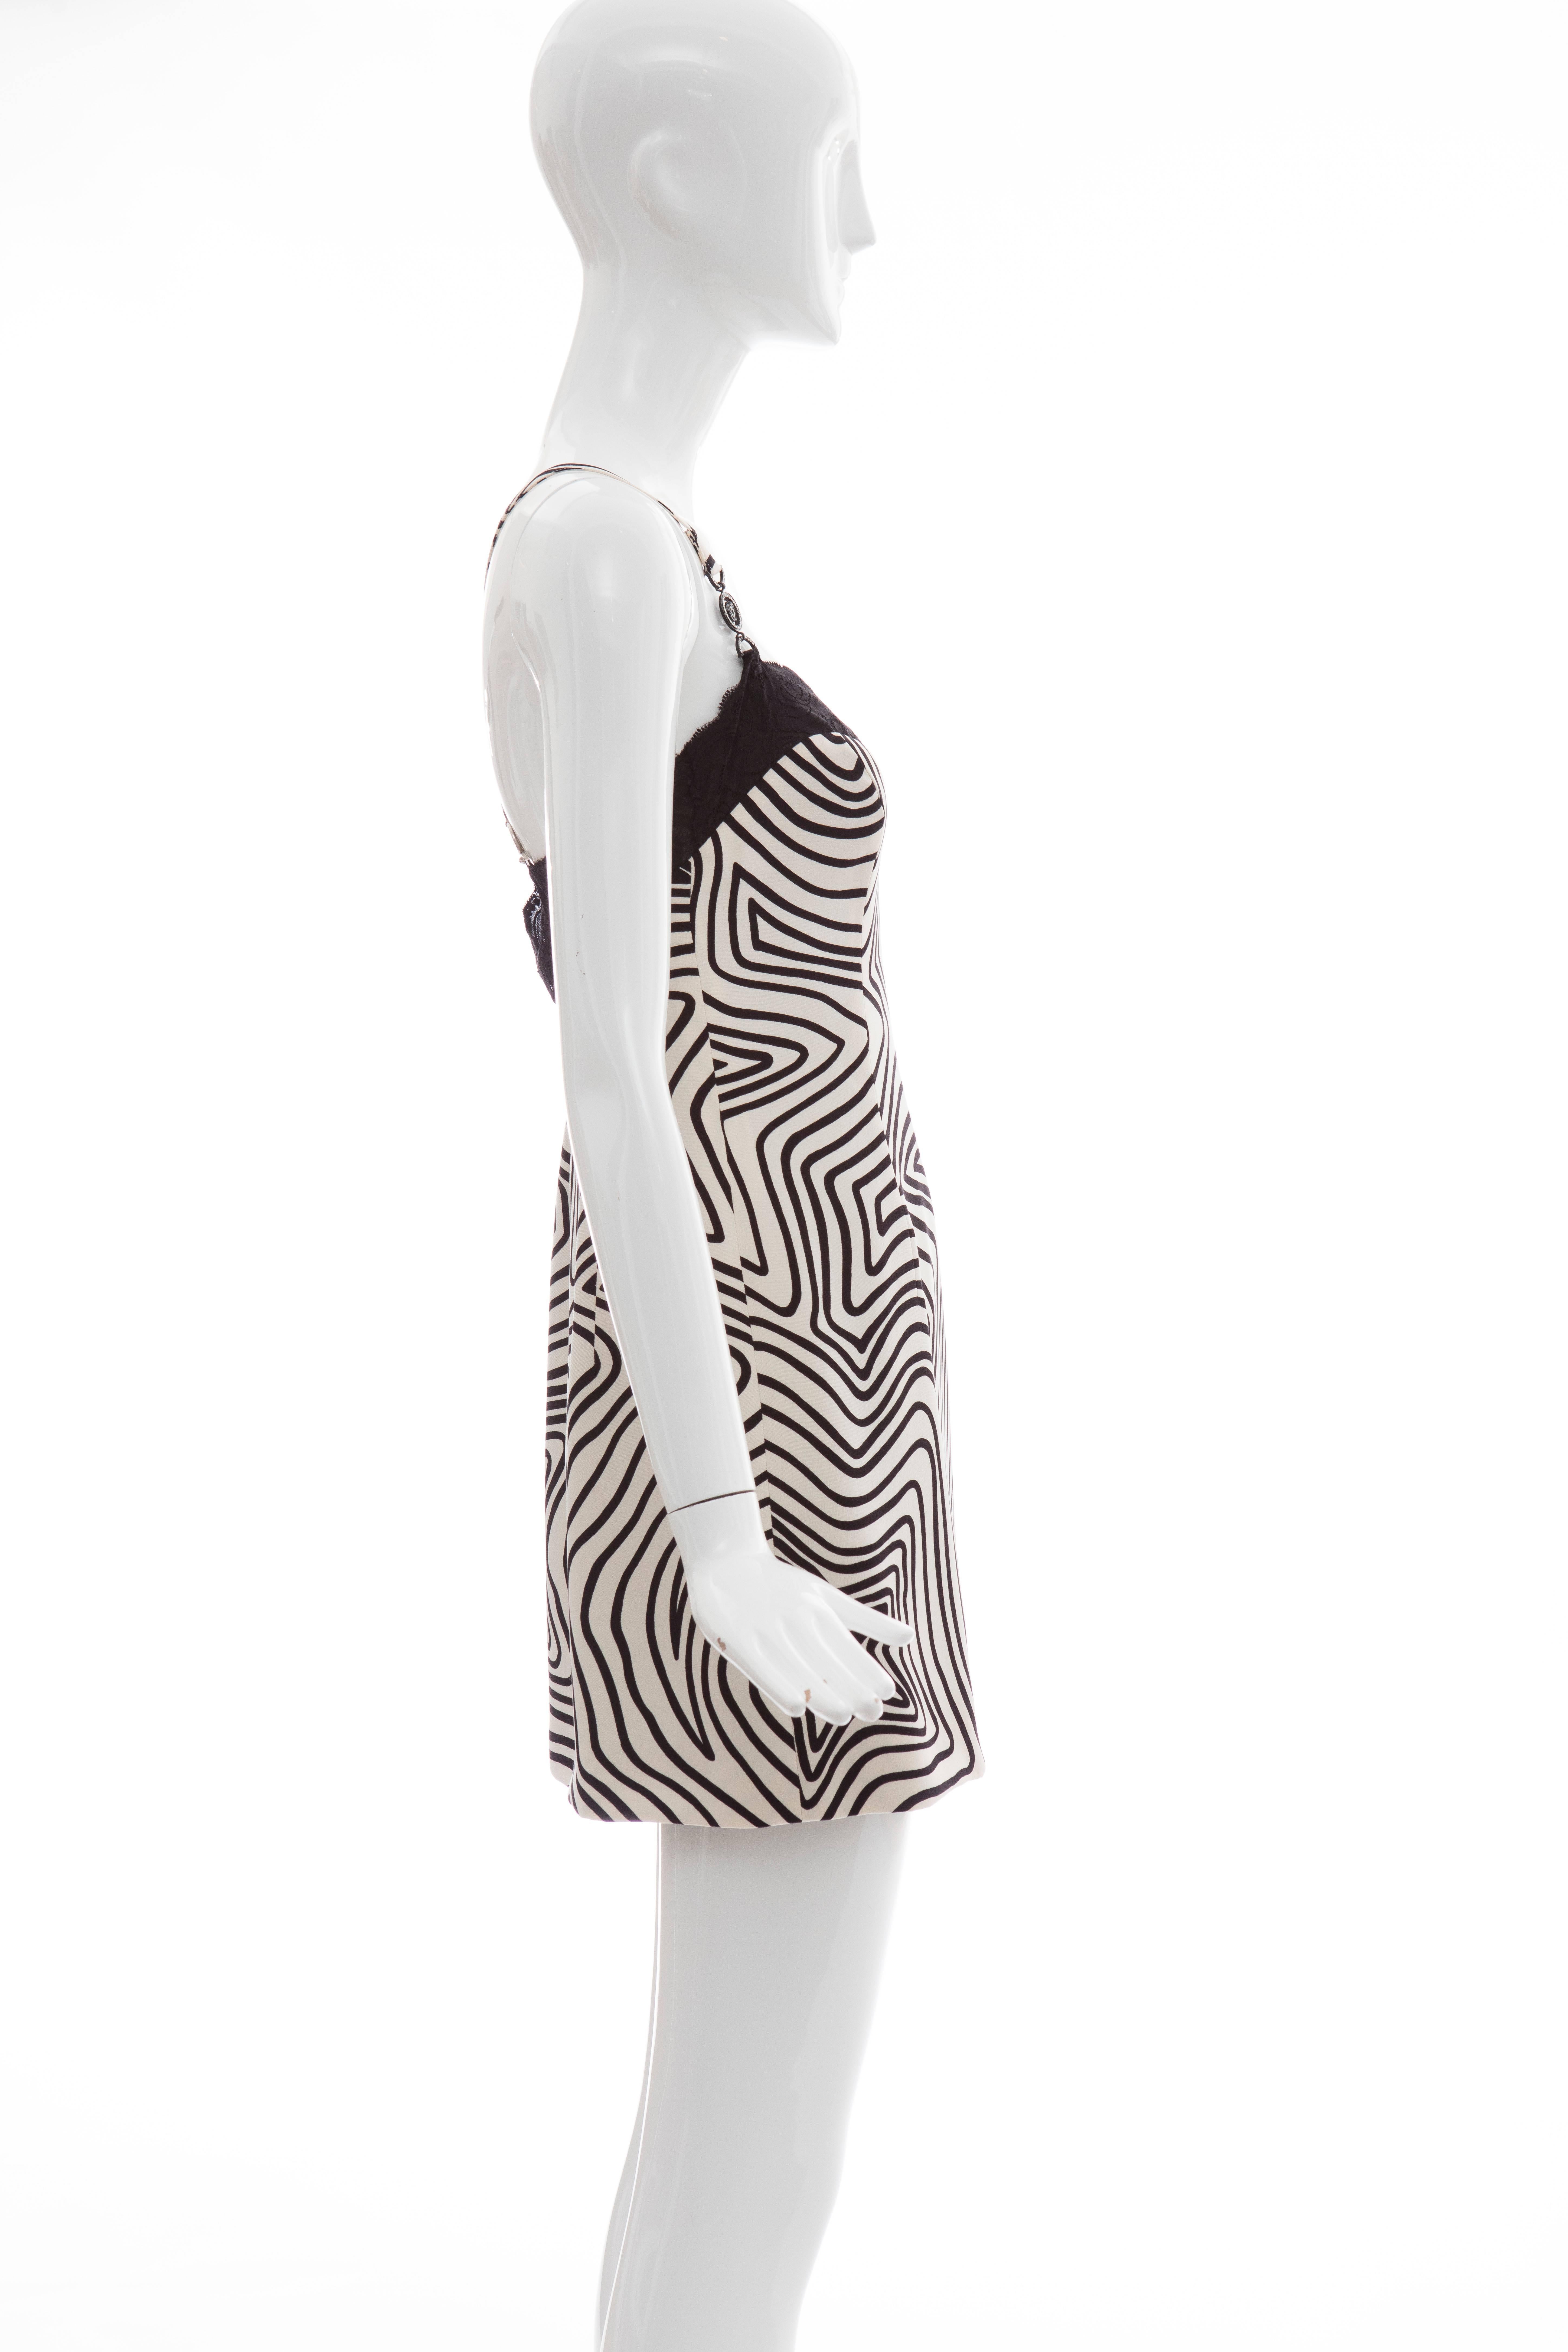 Versace Couture Bergdorf Goodman Label, circa 1990's silk graphic print black and white slip dress with black lace trim, side zip, swarovski embellishments and fully lined in silk.

IT. 38
US. 2

Bust 28, Waist 27, Hips 34, Length 26

